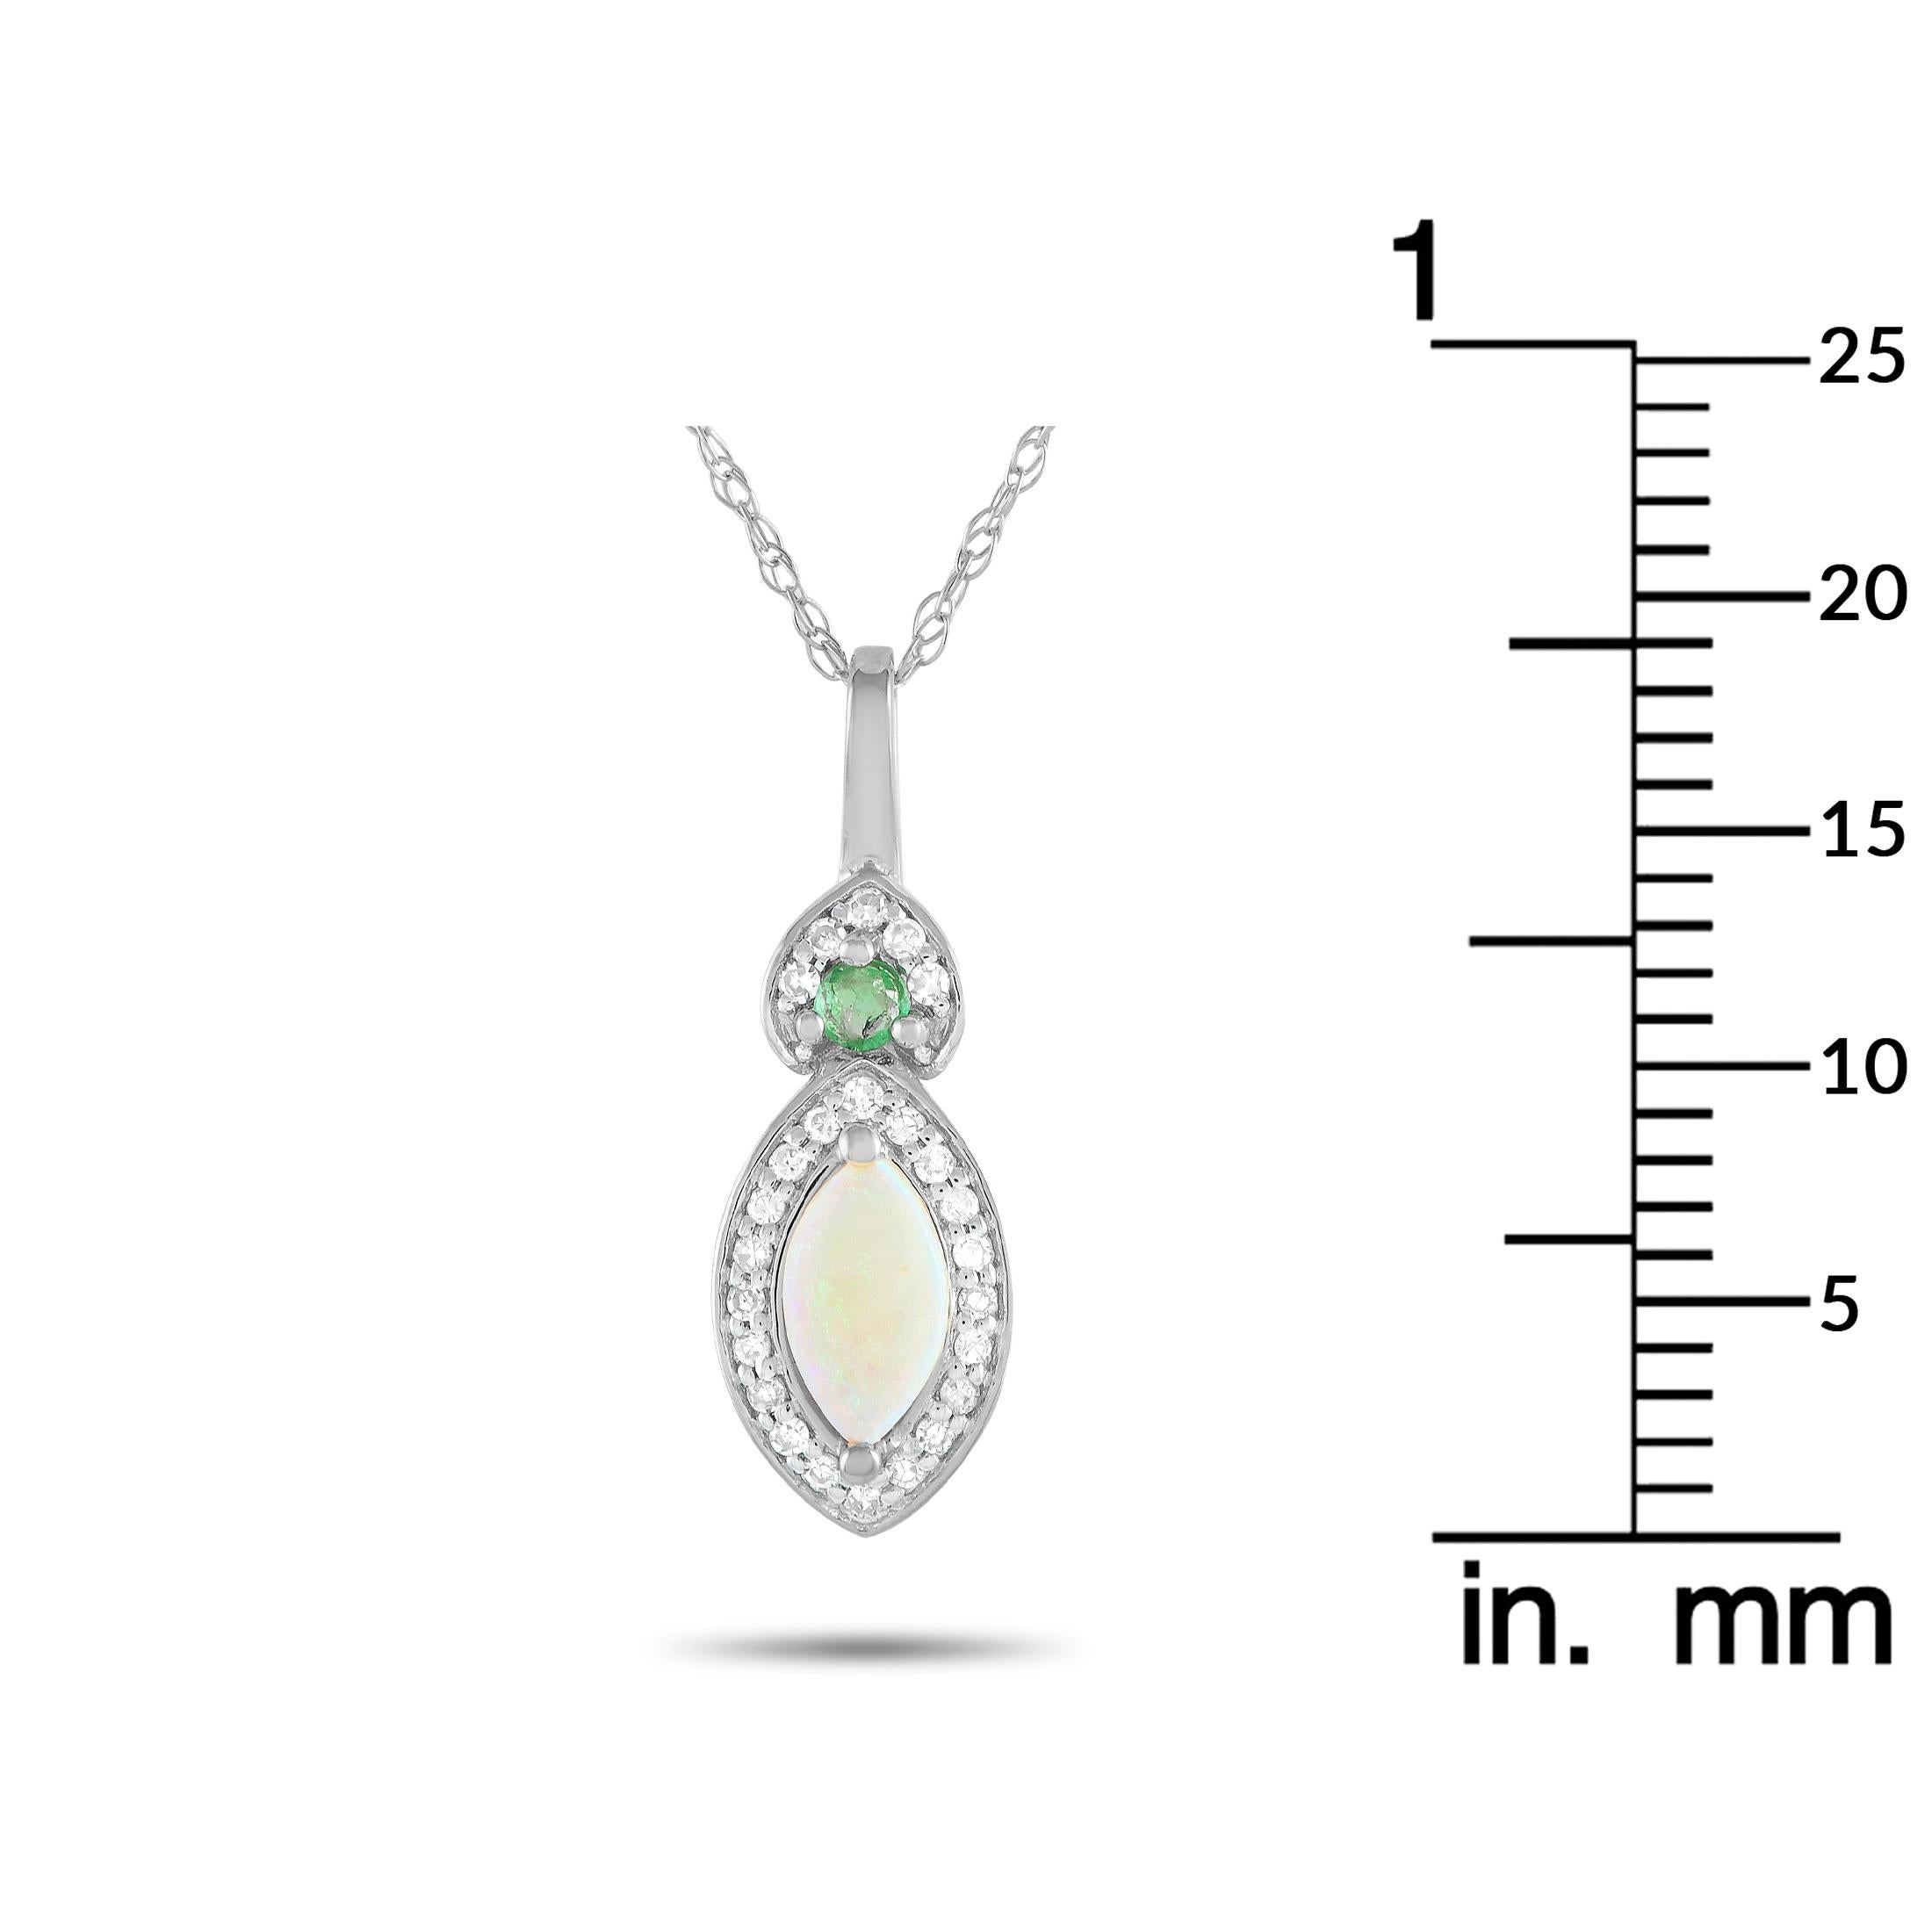 LB Exclusive 14K White Gold 0.07ct Diamond Pendant Necklace PD4-16299WOPEM In New Condition For Sale In Southampton, PA